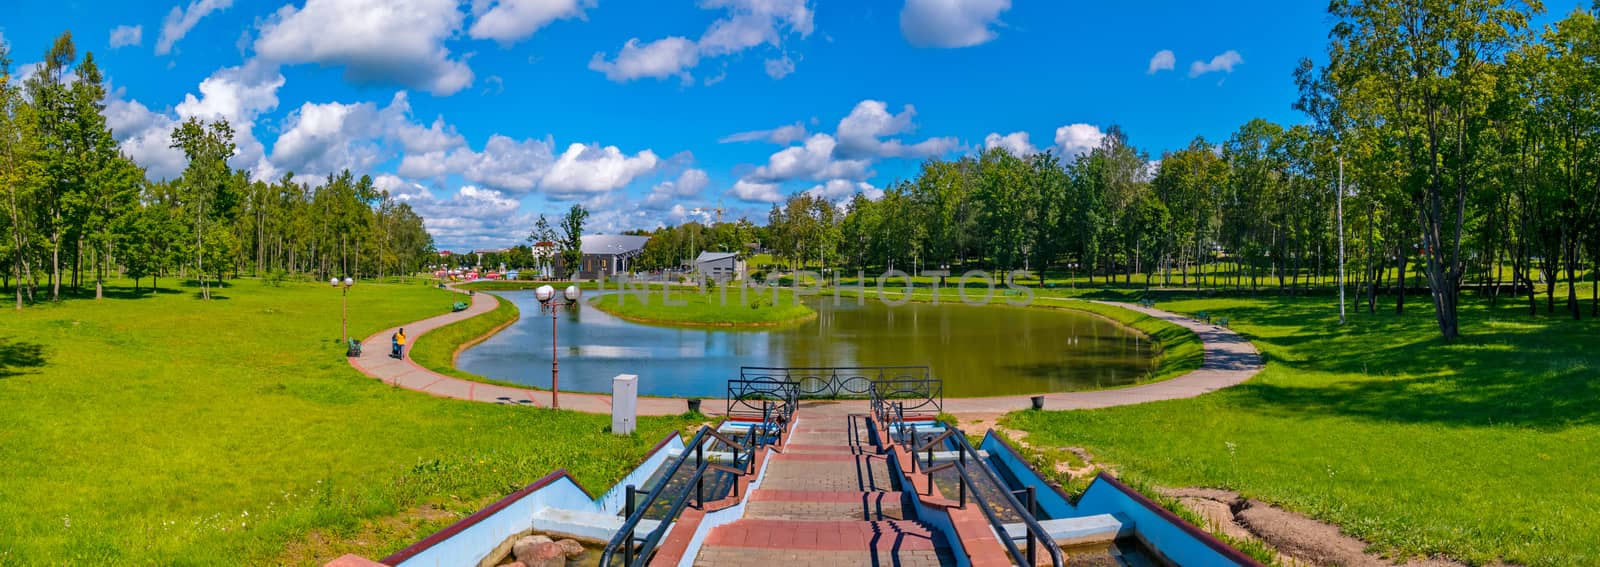 a magnificent panorama of a summer sunny day in a park with a pond and a green island in the middle of it and white clouds floating above this beauty by Adamchuk